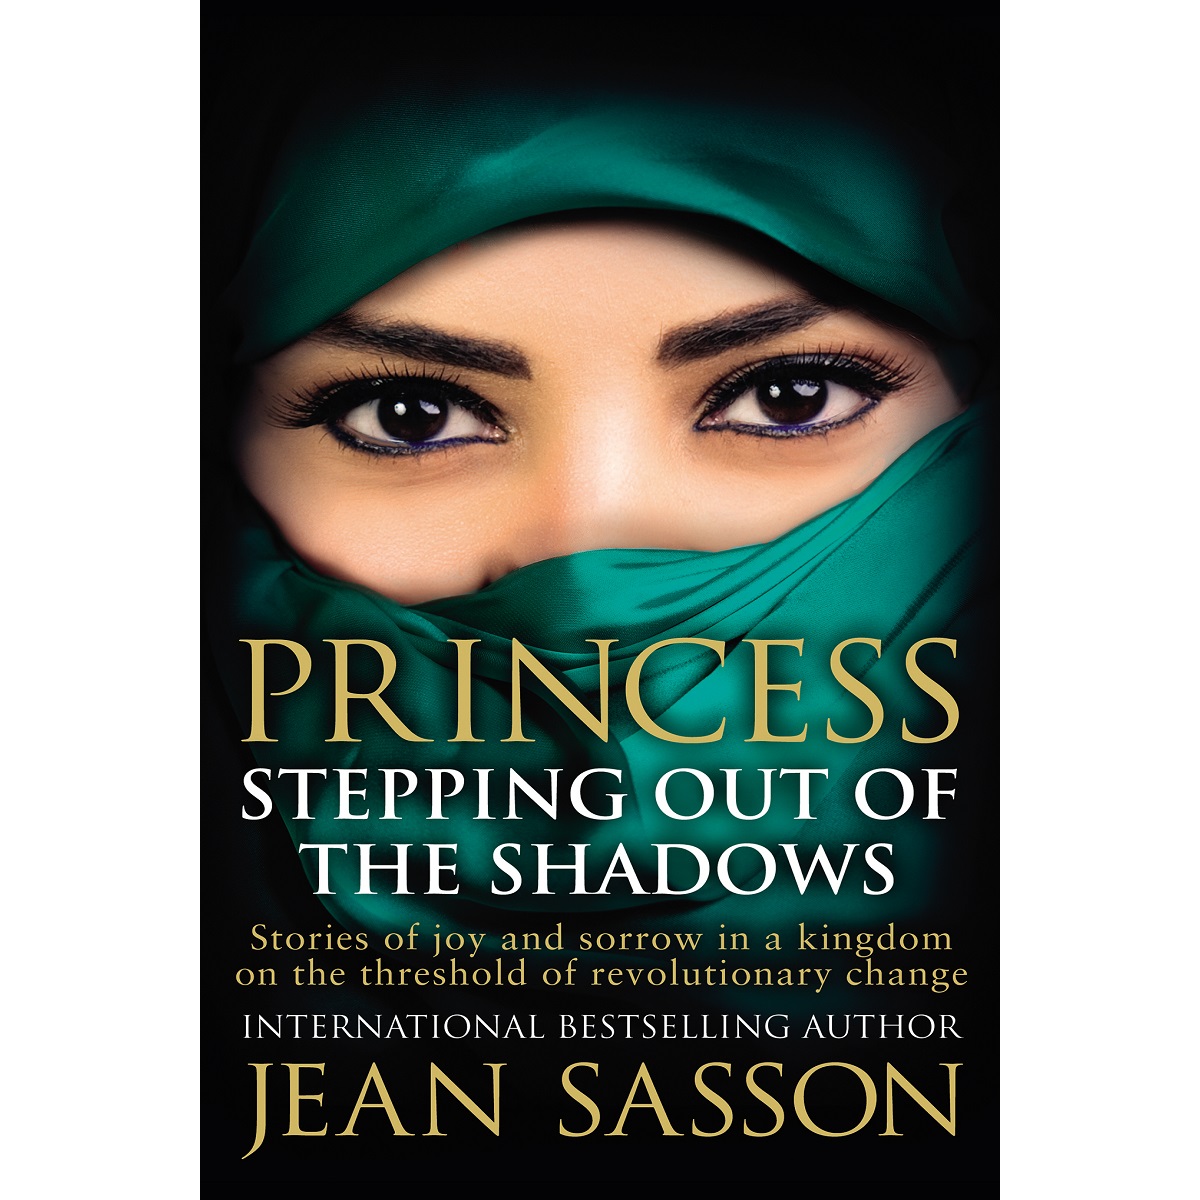 Princess: Stepping Out of the Shadows By Jean Sasson